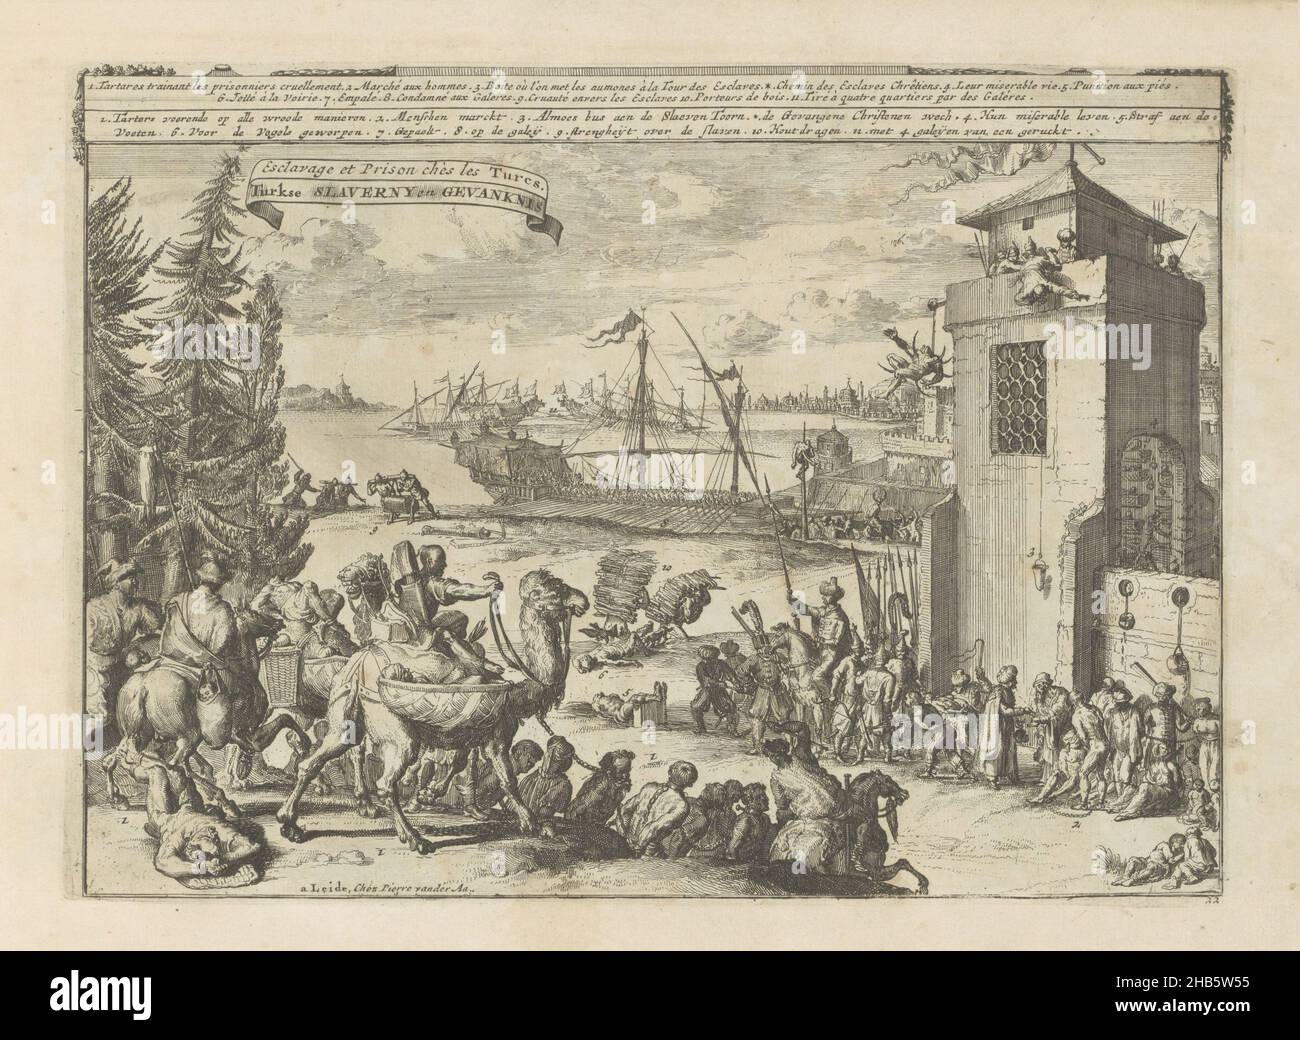 Slaves and prisoners with the Turks, Turkish slavery and prison, Esclavage et Prison chès les Turcs (title on object), Les Indes Orientales et Occidentales et autres lieux (series title), The treatment of slaves and prisoners with the Turks. In the left foreground it is shown how prisoners are transported. One of the men is being dragged by a horse. Others are being driven on chains. On the right a man is hanging from a tower. A second man is hung by his feet over the edge. Below, a slave market. Near two timber carriers, a man is eaten by a bird and two dogs. In the water are some galleys Stock Photo